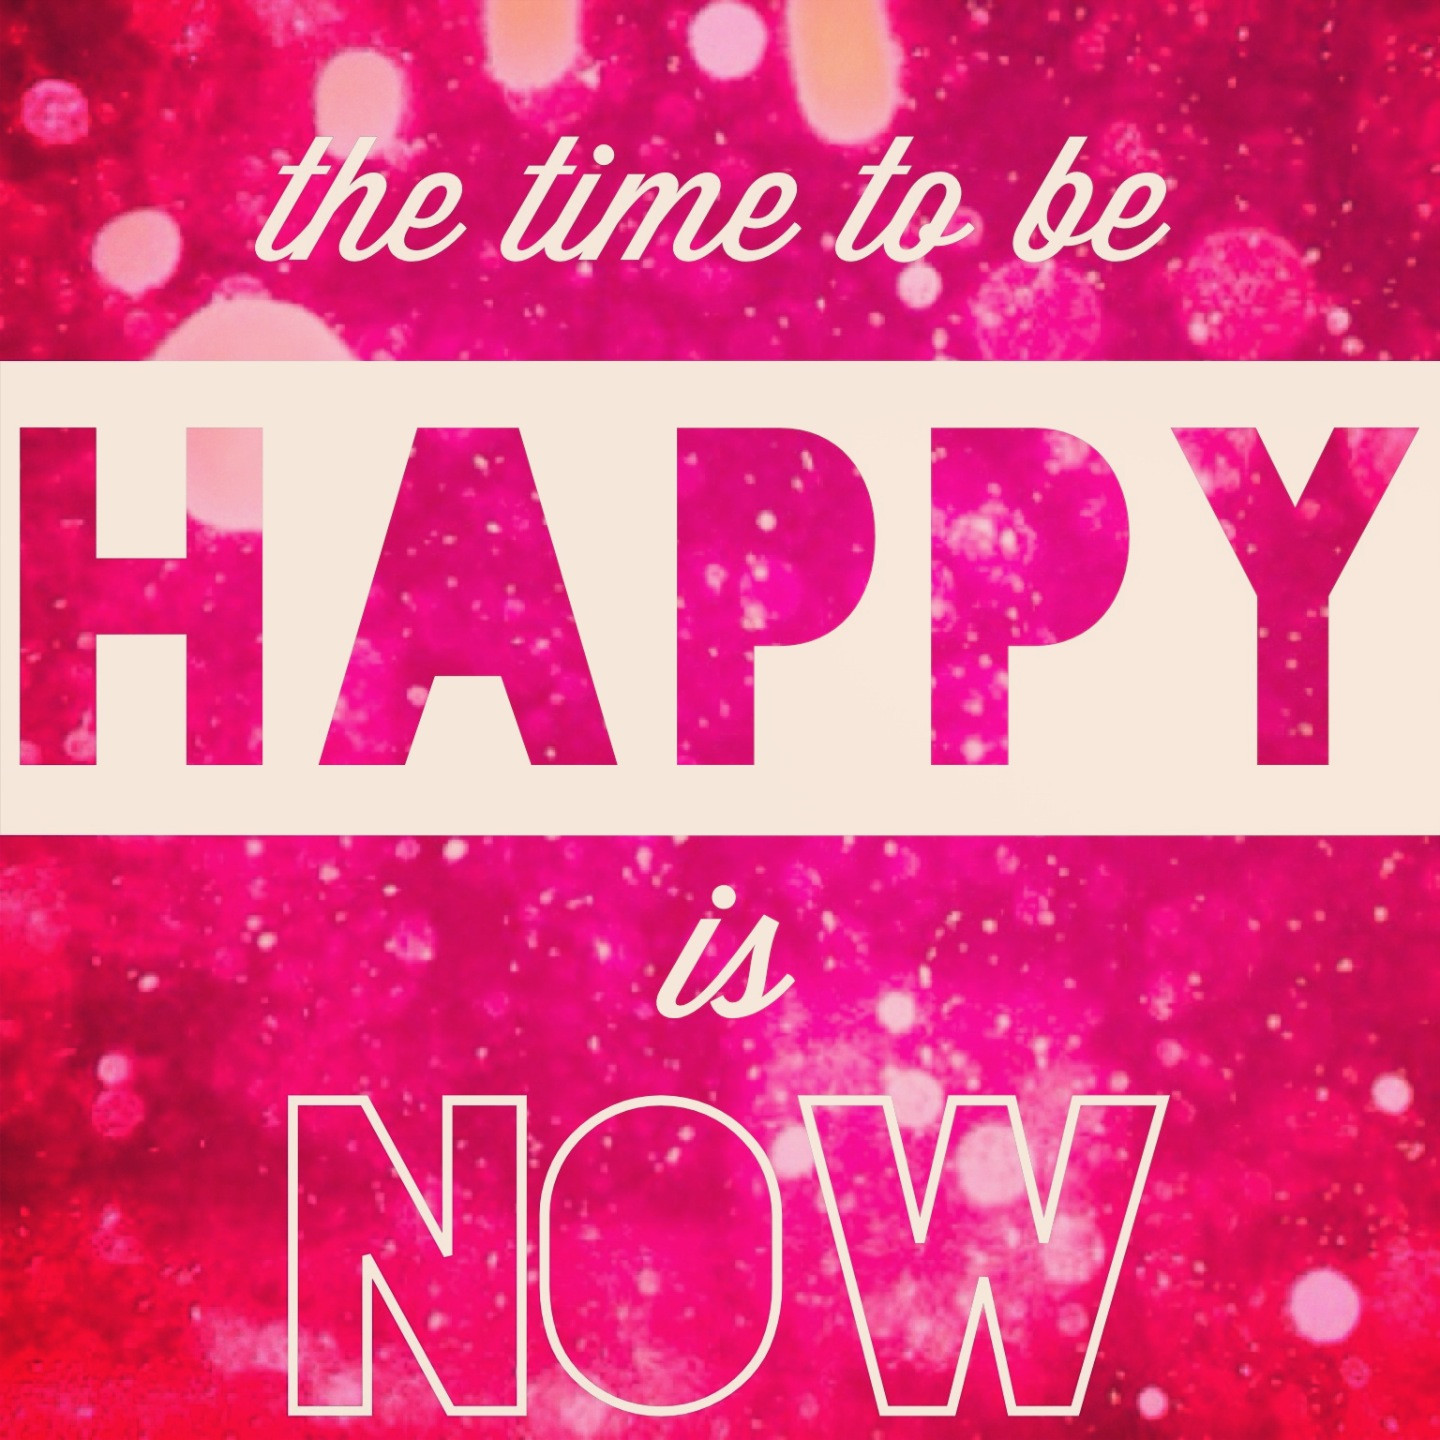 Inspirational Quotes Happiness
 Top 8 Tricks for Accessing “Happy” Now